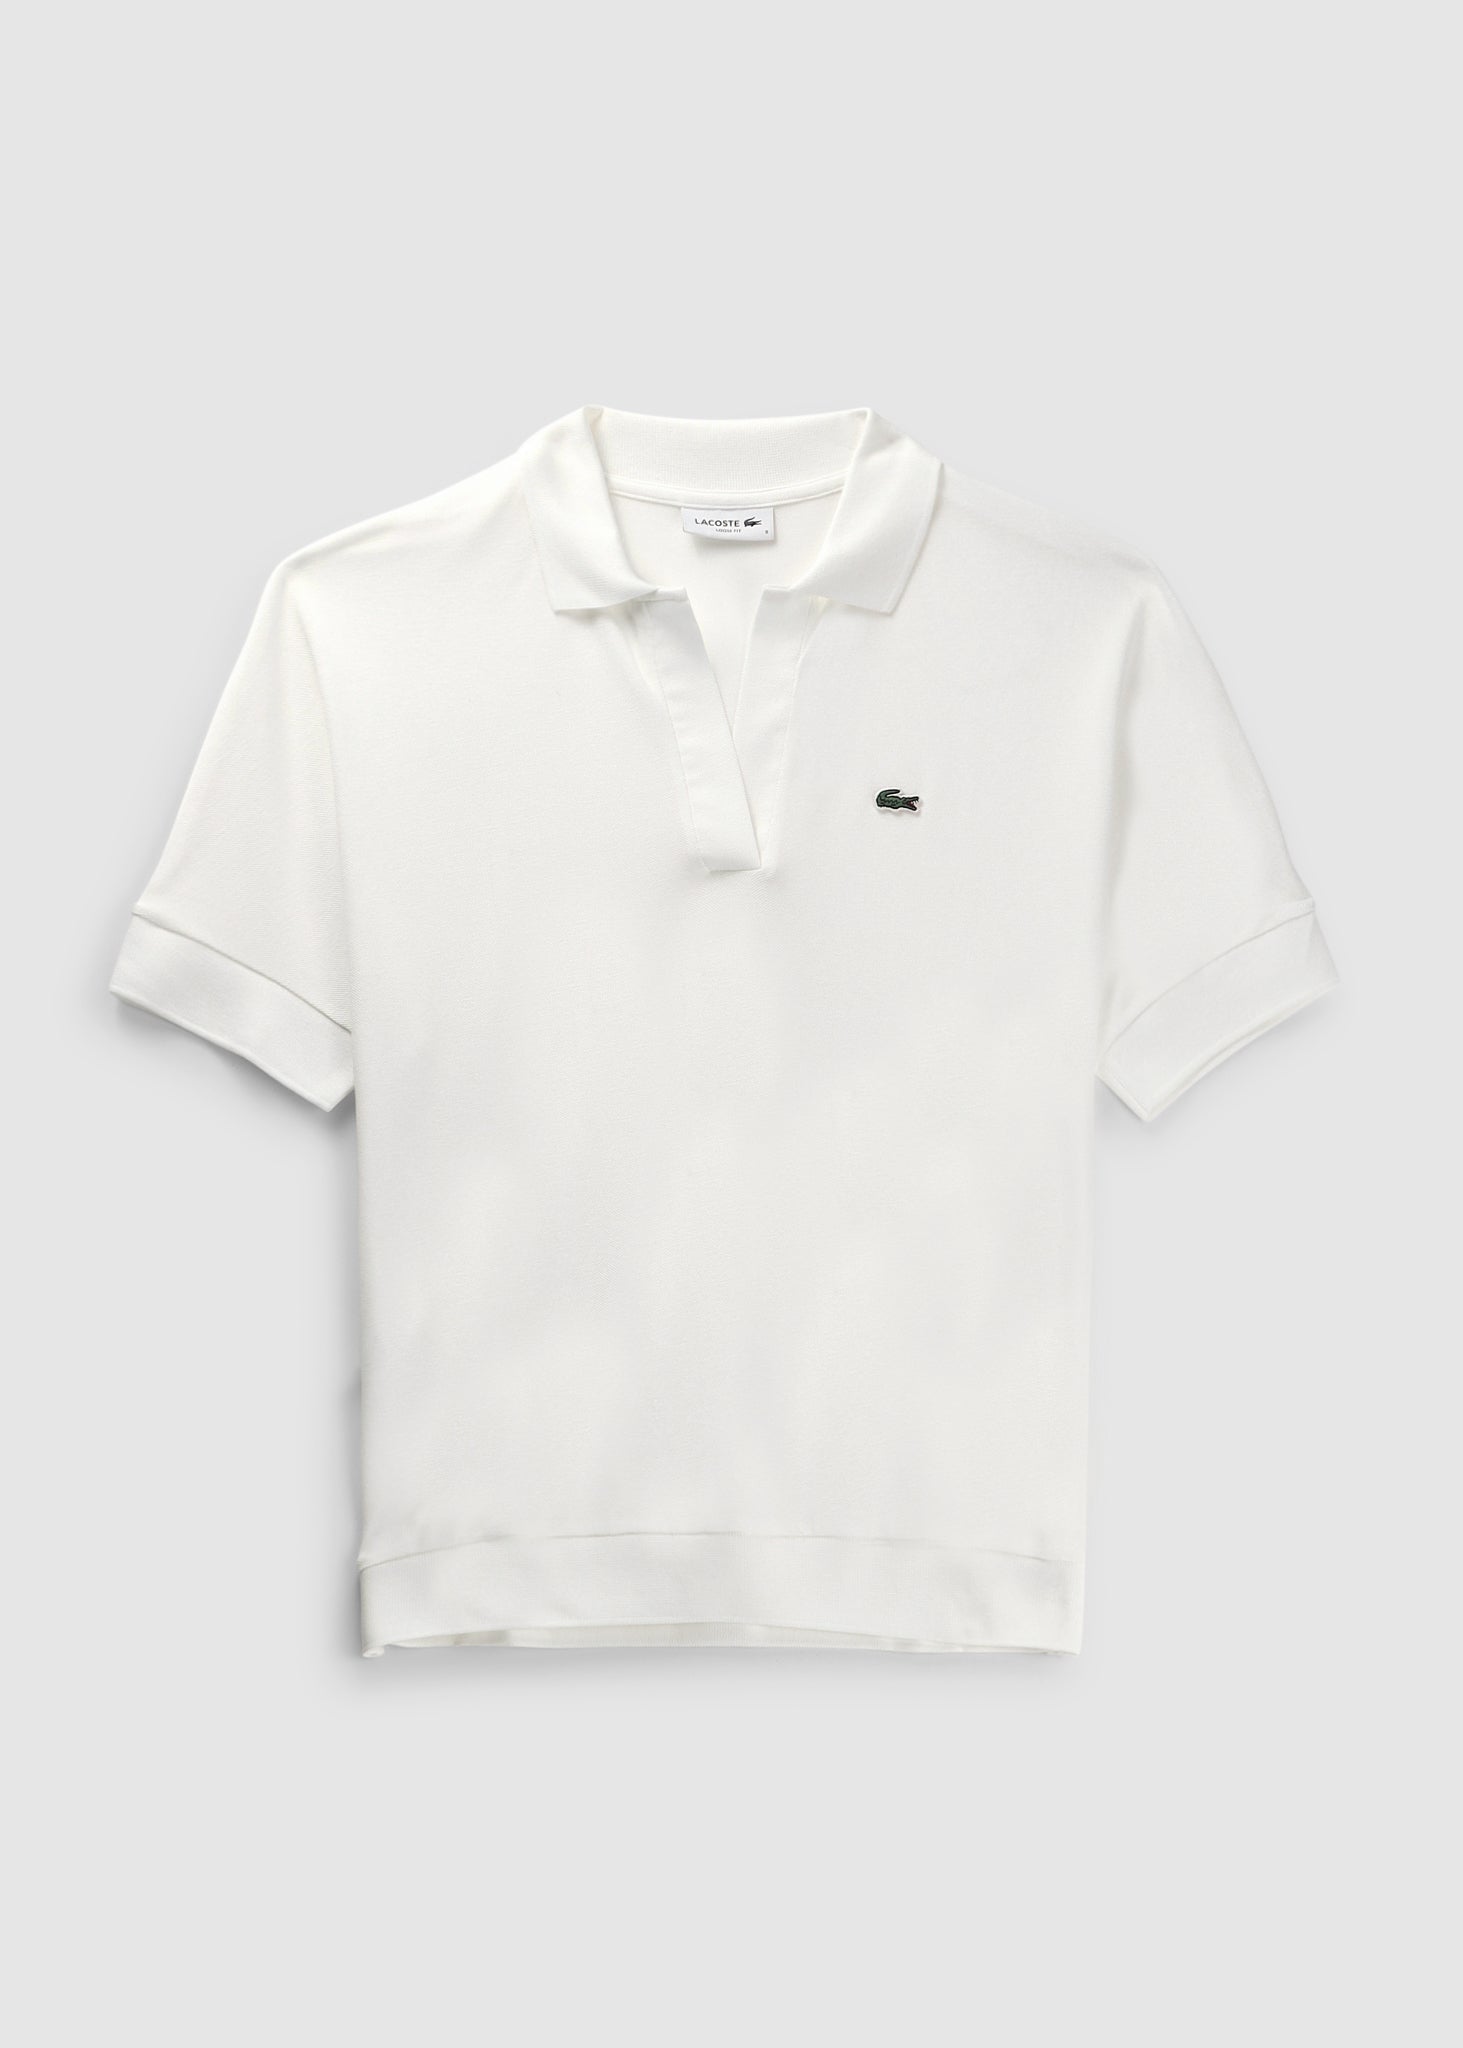 Image of Lacoste Womens Boxy Pique Polo Shirt In White